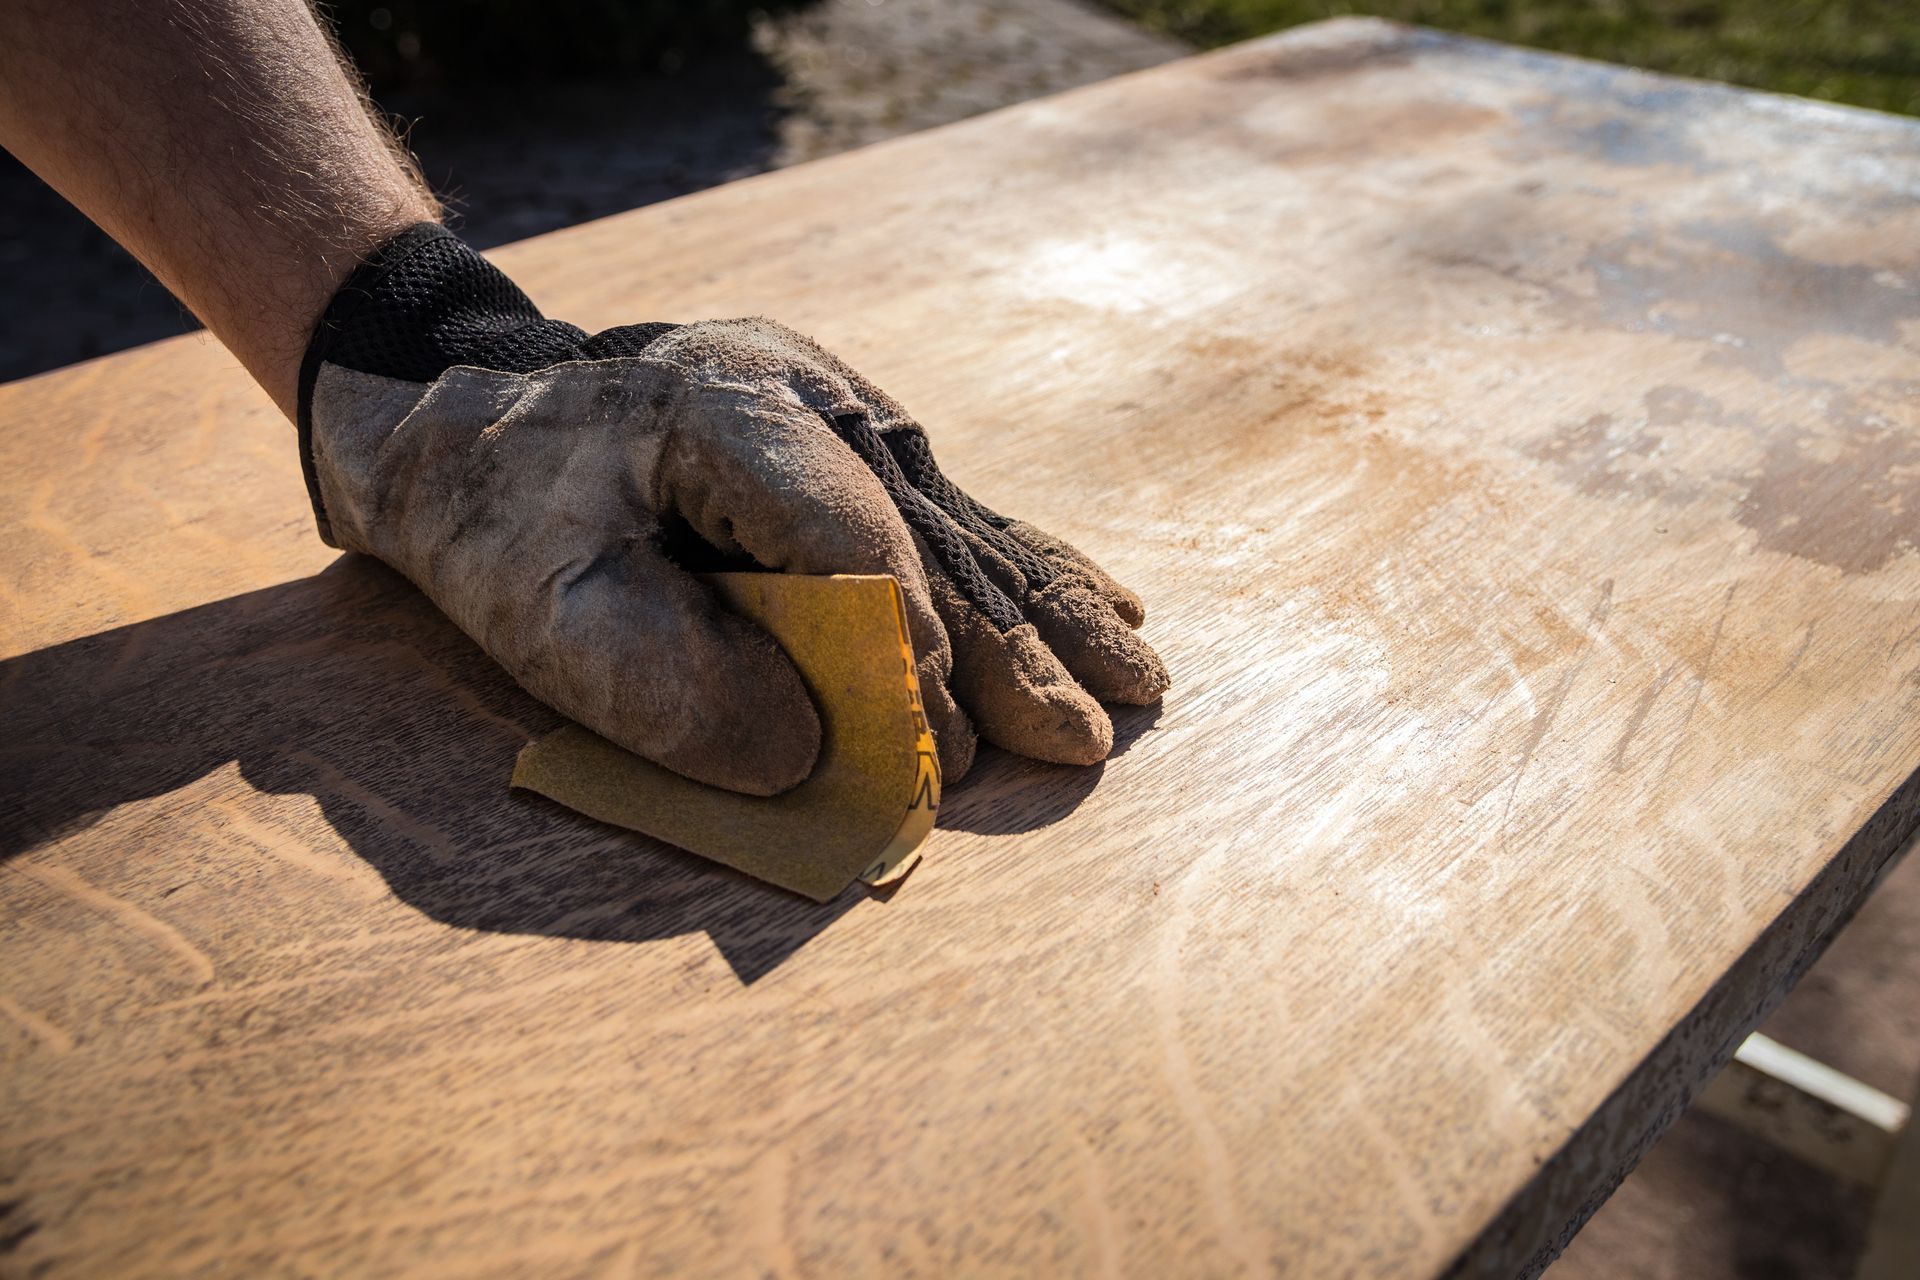 a person wearing gloves is sanding a piece of wood